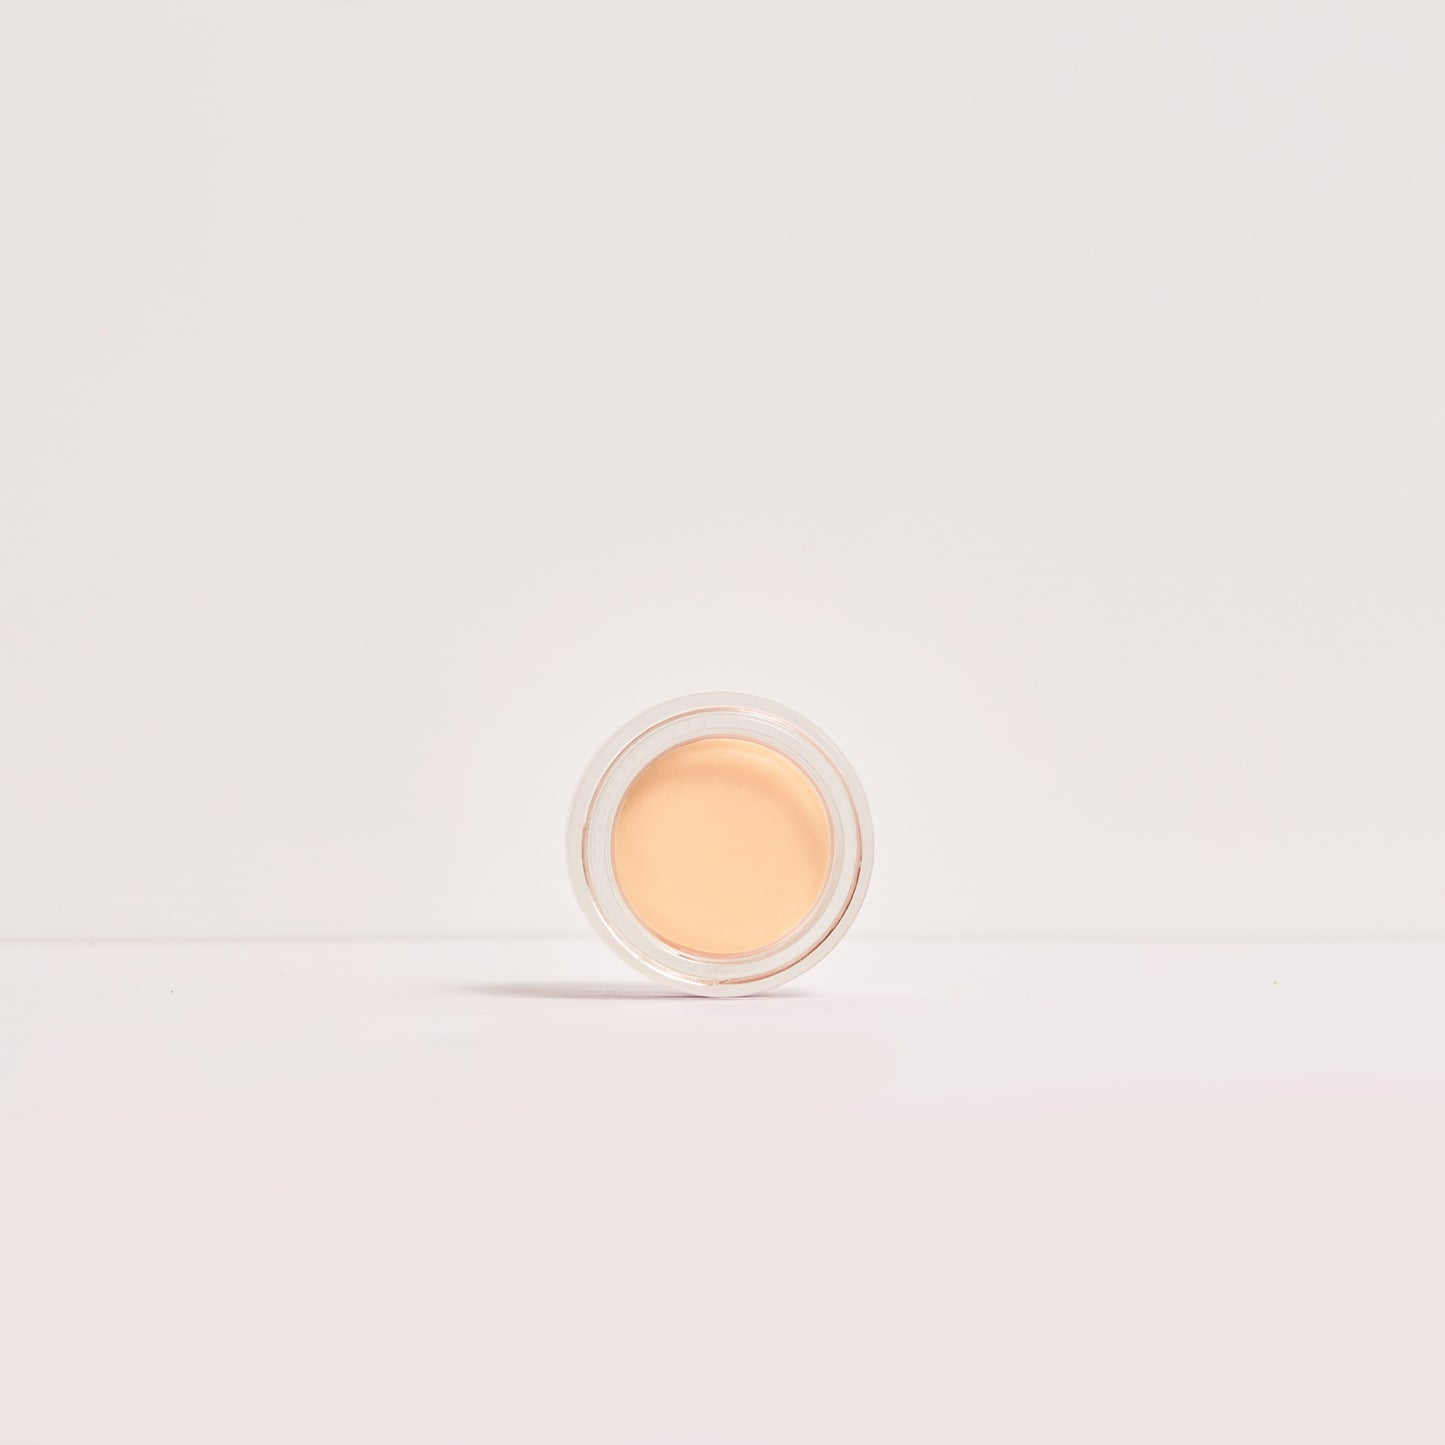 OMni Radiant Zinc Sheer Coral natural multi-use balm for dry lips and skin, highlighter on cheeks #7